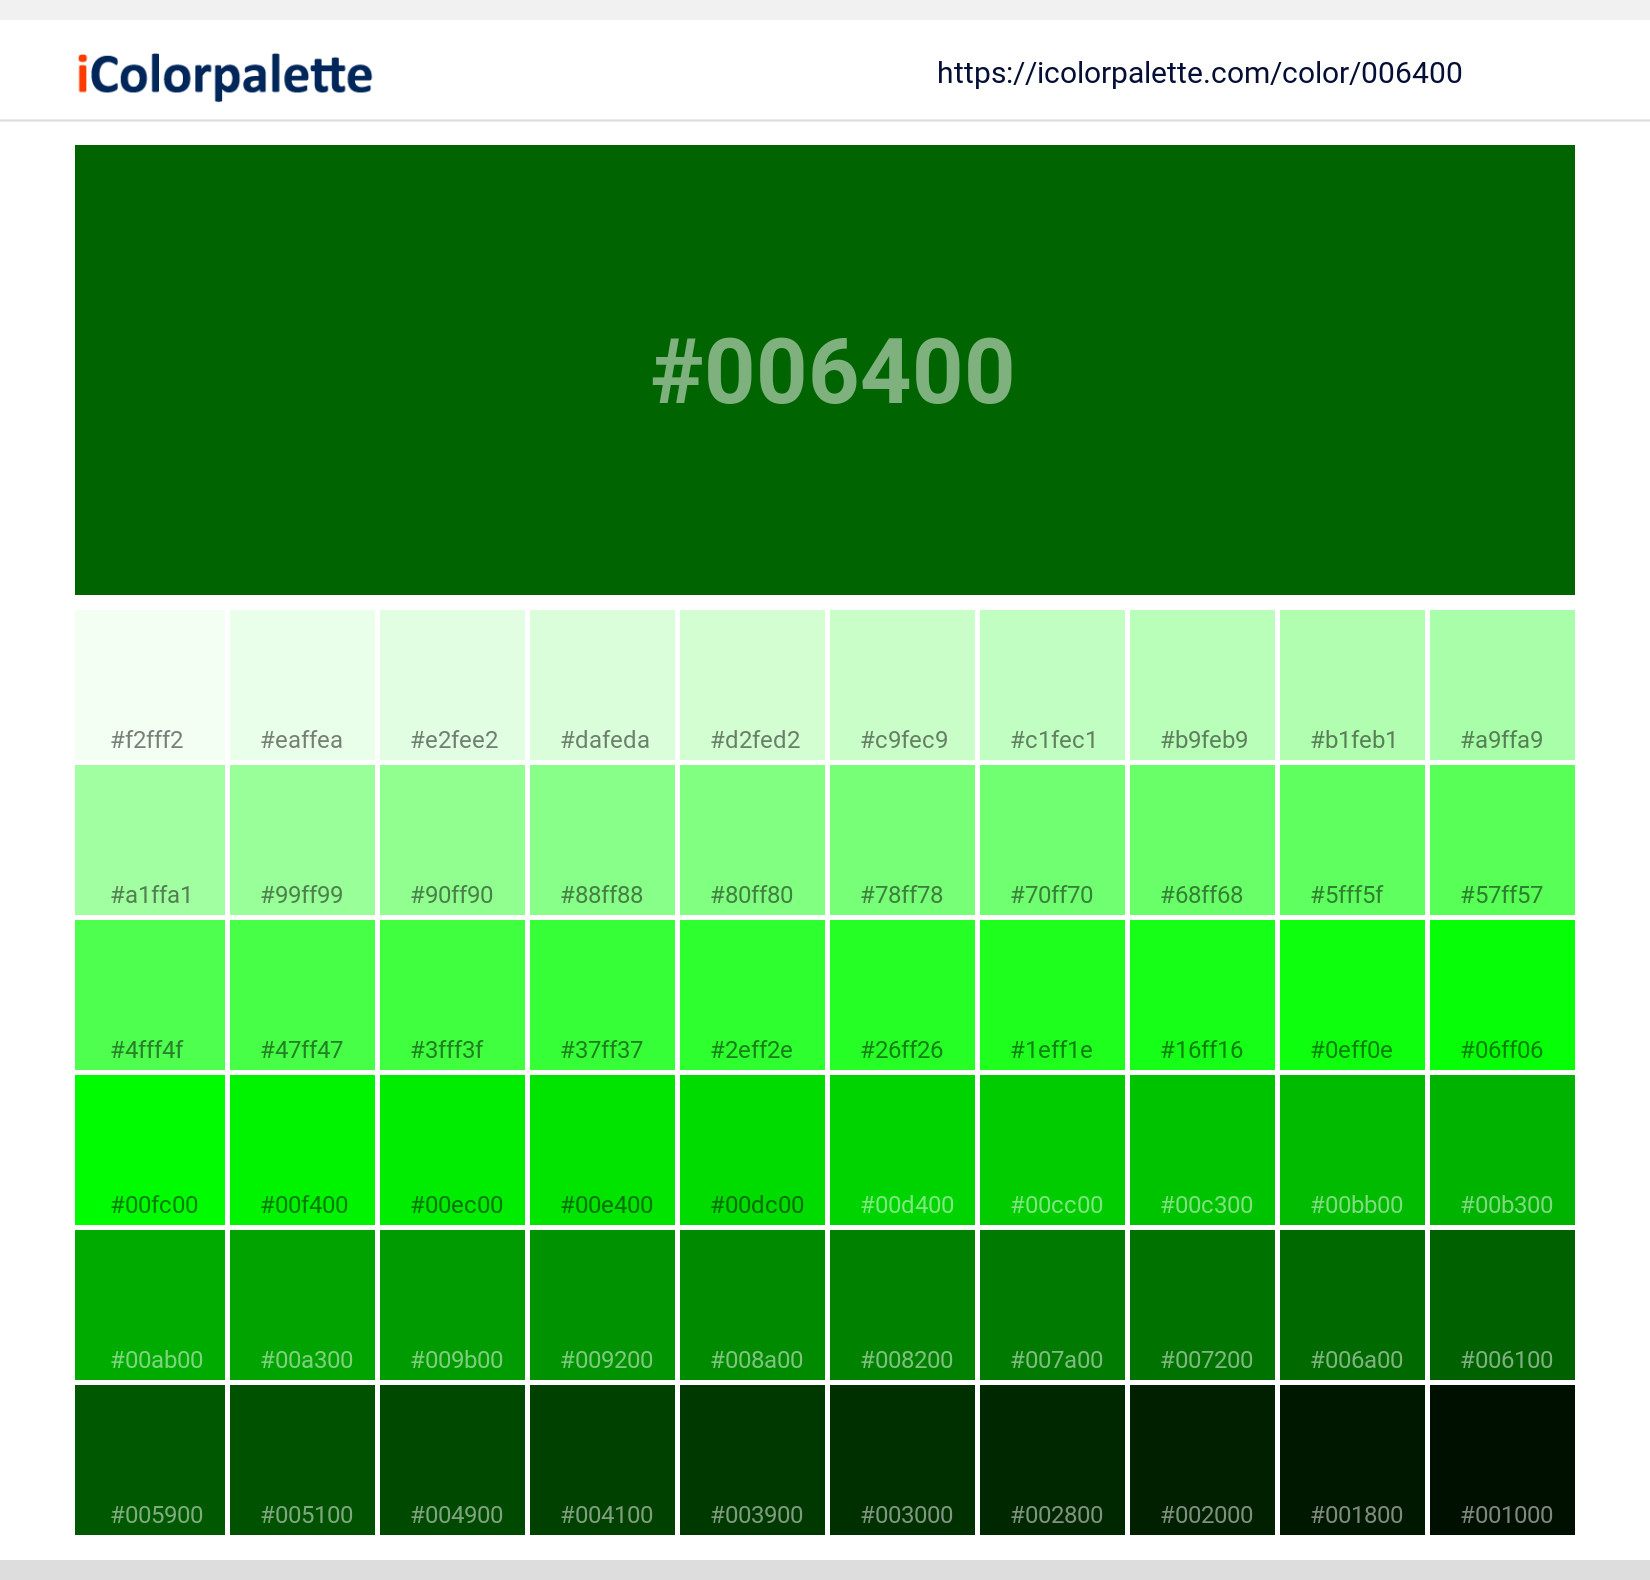 About Light Green - Color codes, similar colors and paints 